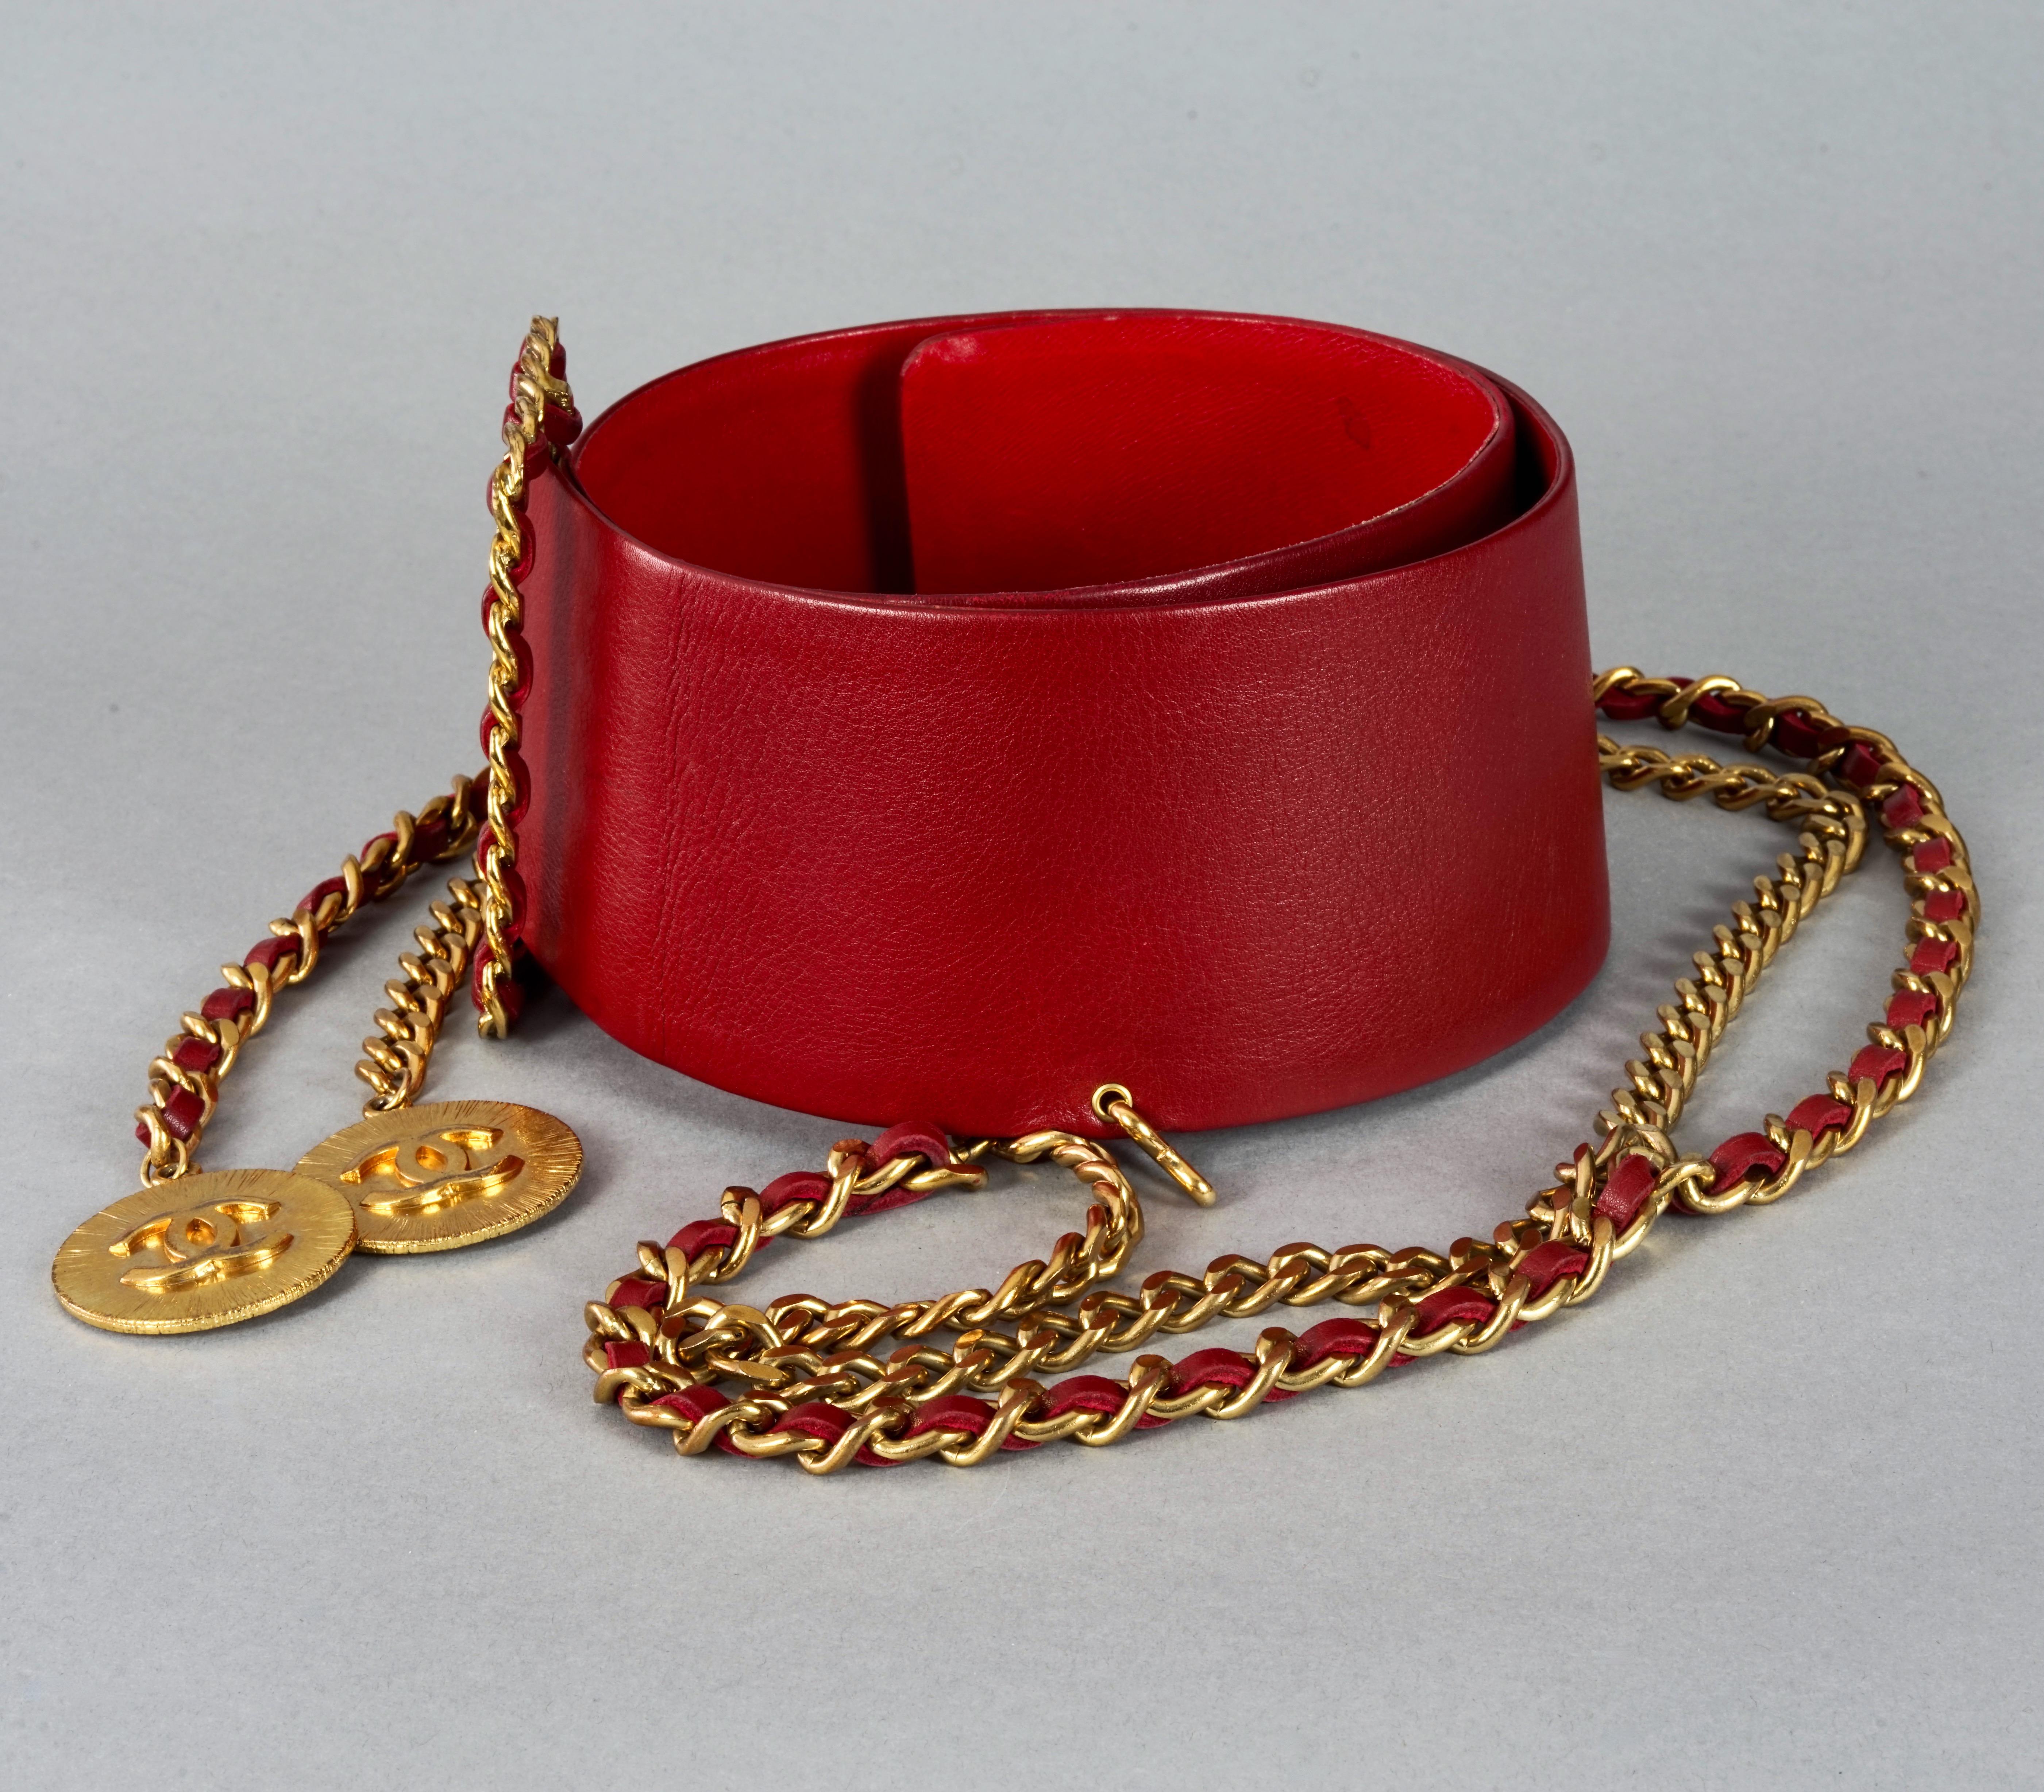 Black Vintage CHANEL Claudia Schiffer Wide Long Chain Medallion Red Leather Belt For Sale